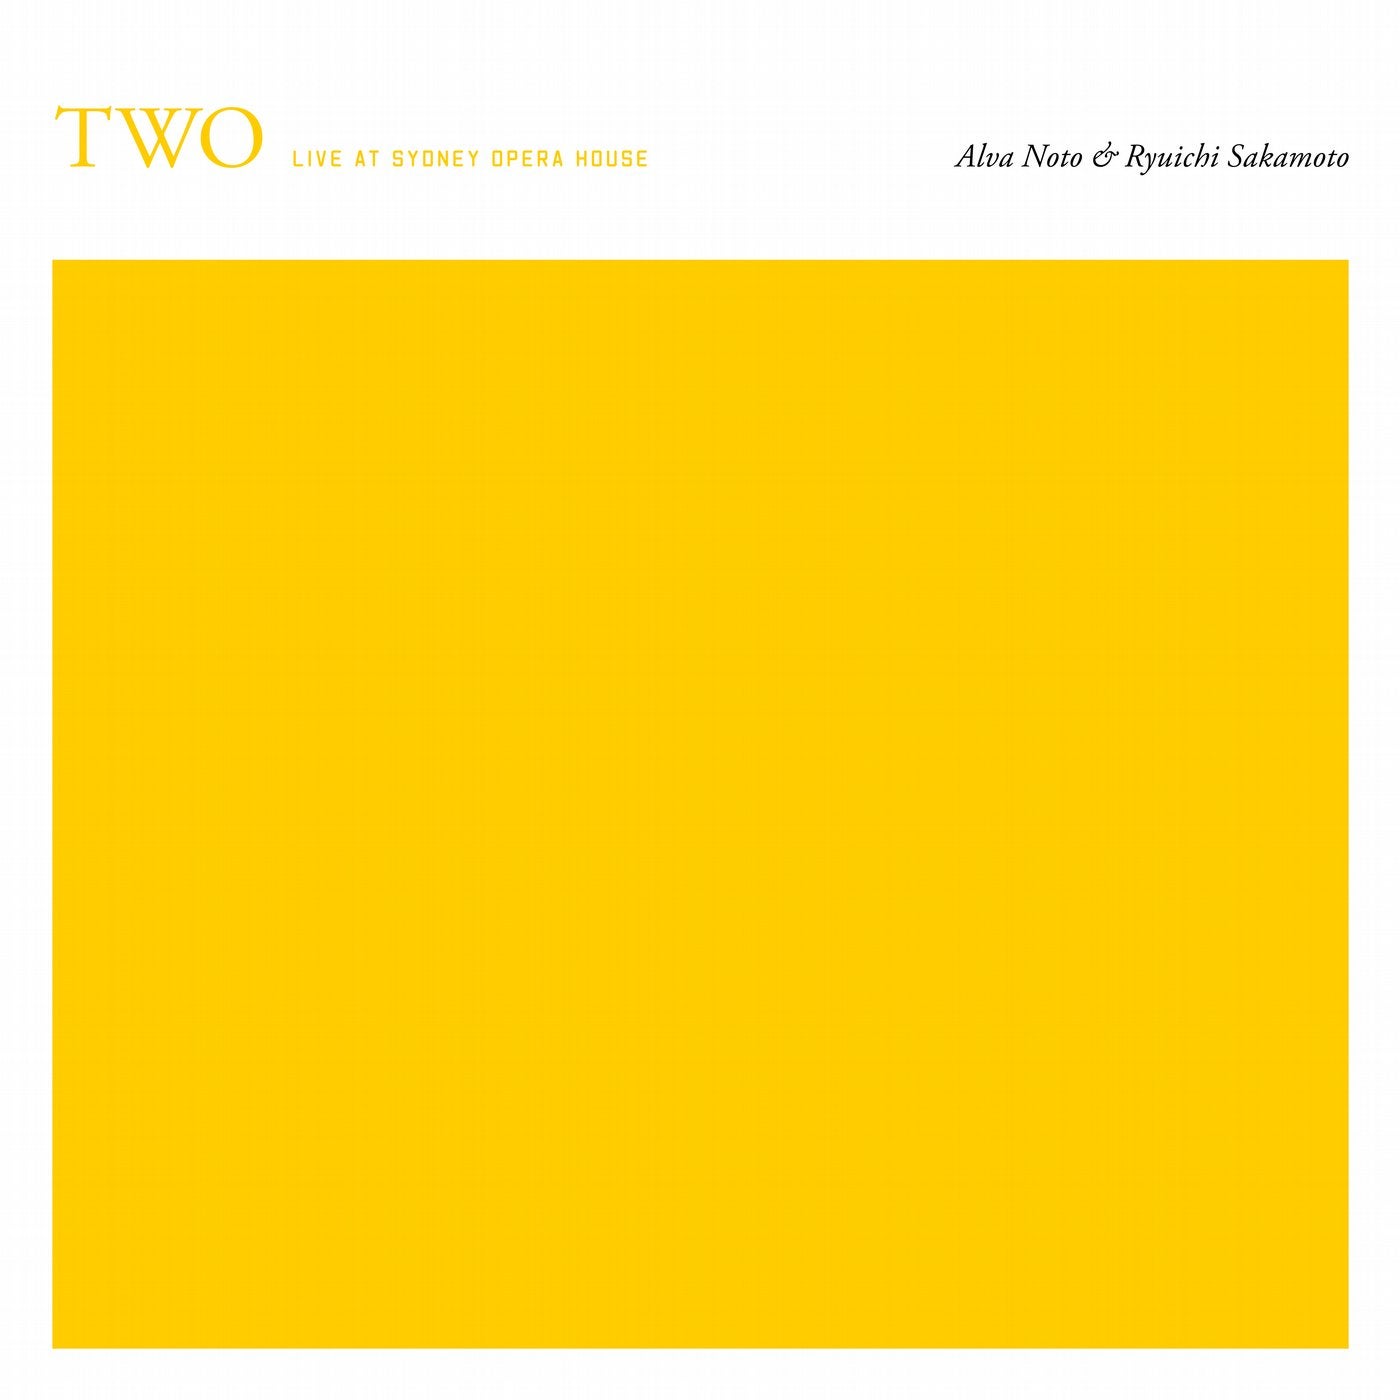 Two (Live at Sydney Opera House)